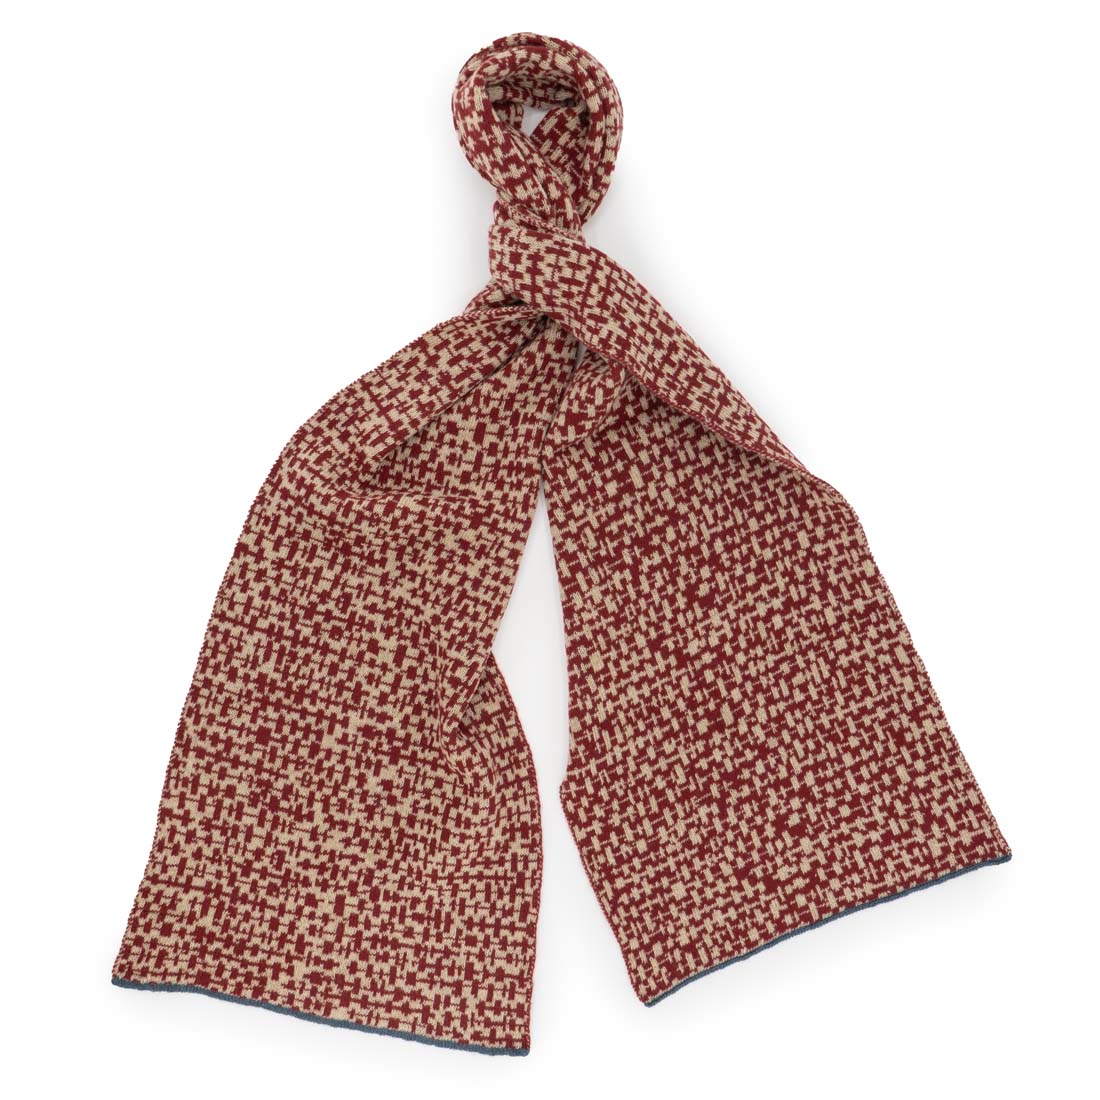 Tumult Rooster Wool Scarf